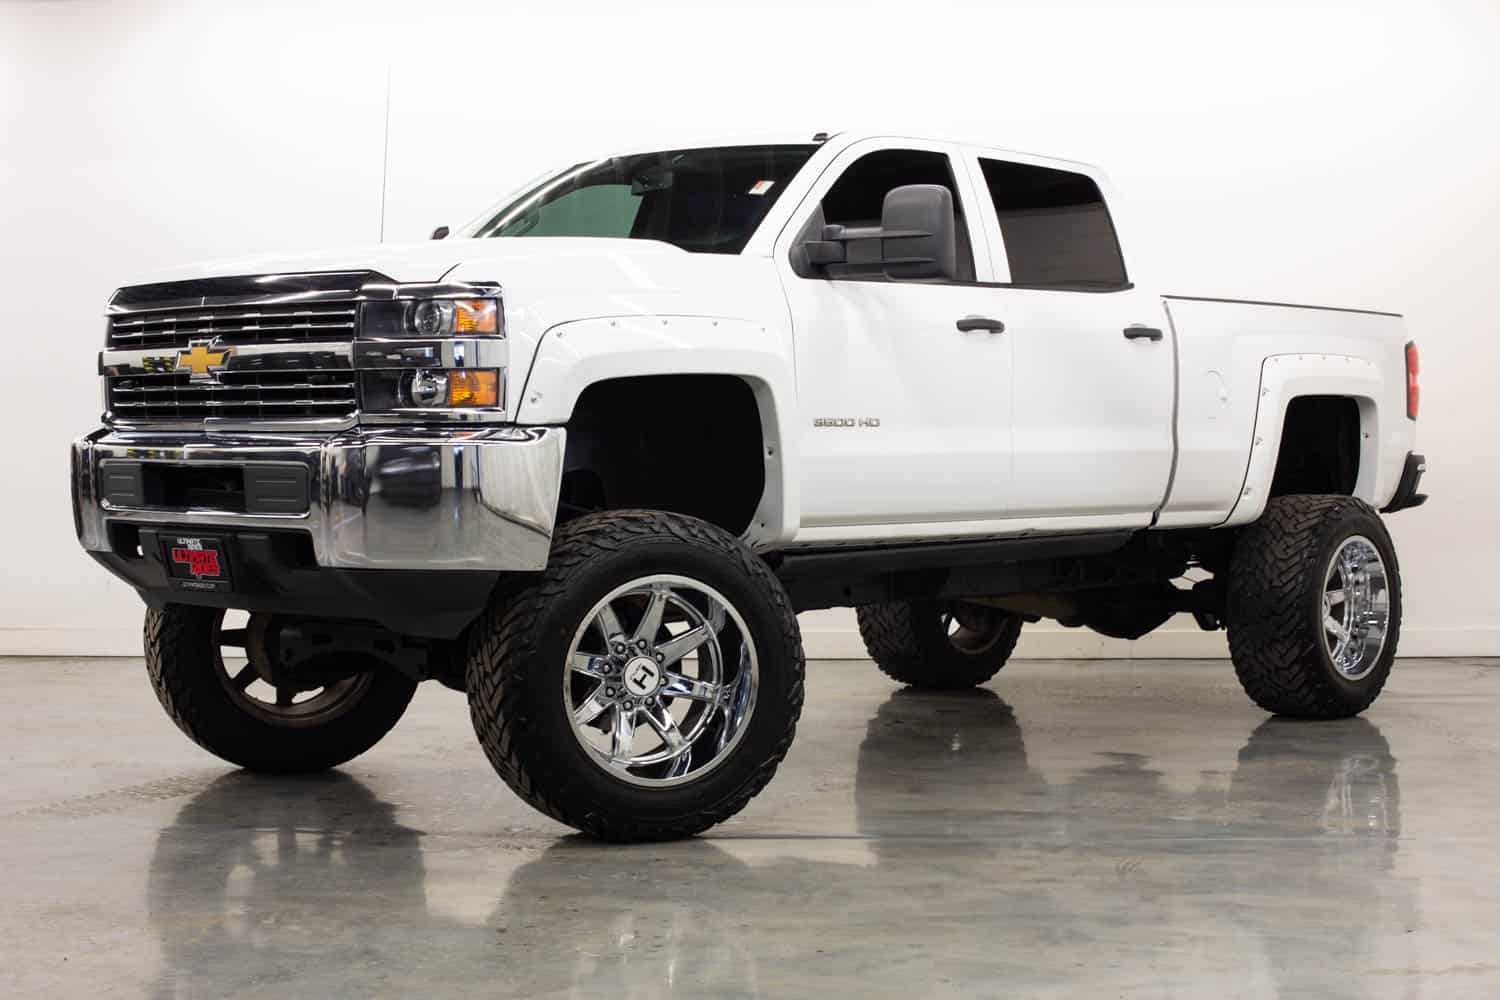 Lifted Trucks for Sale in Louisiana